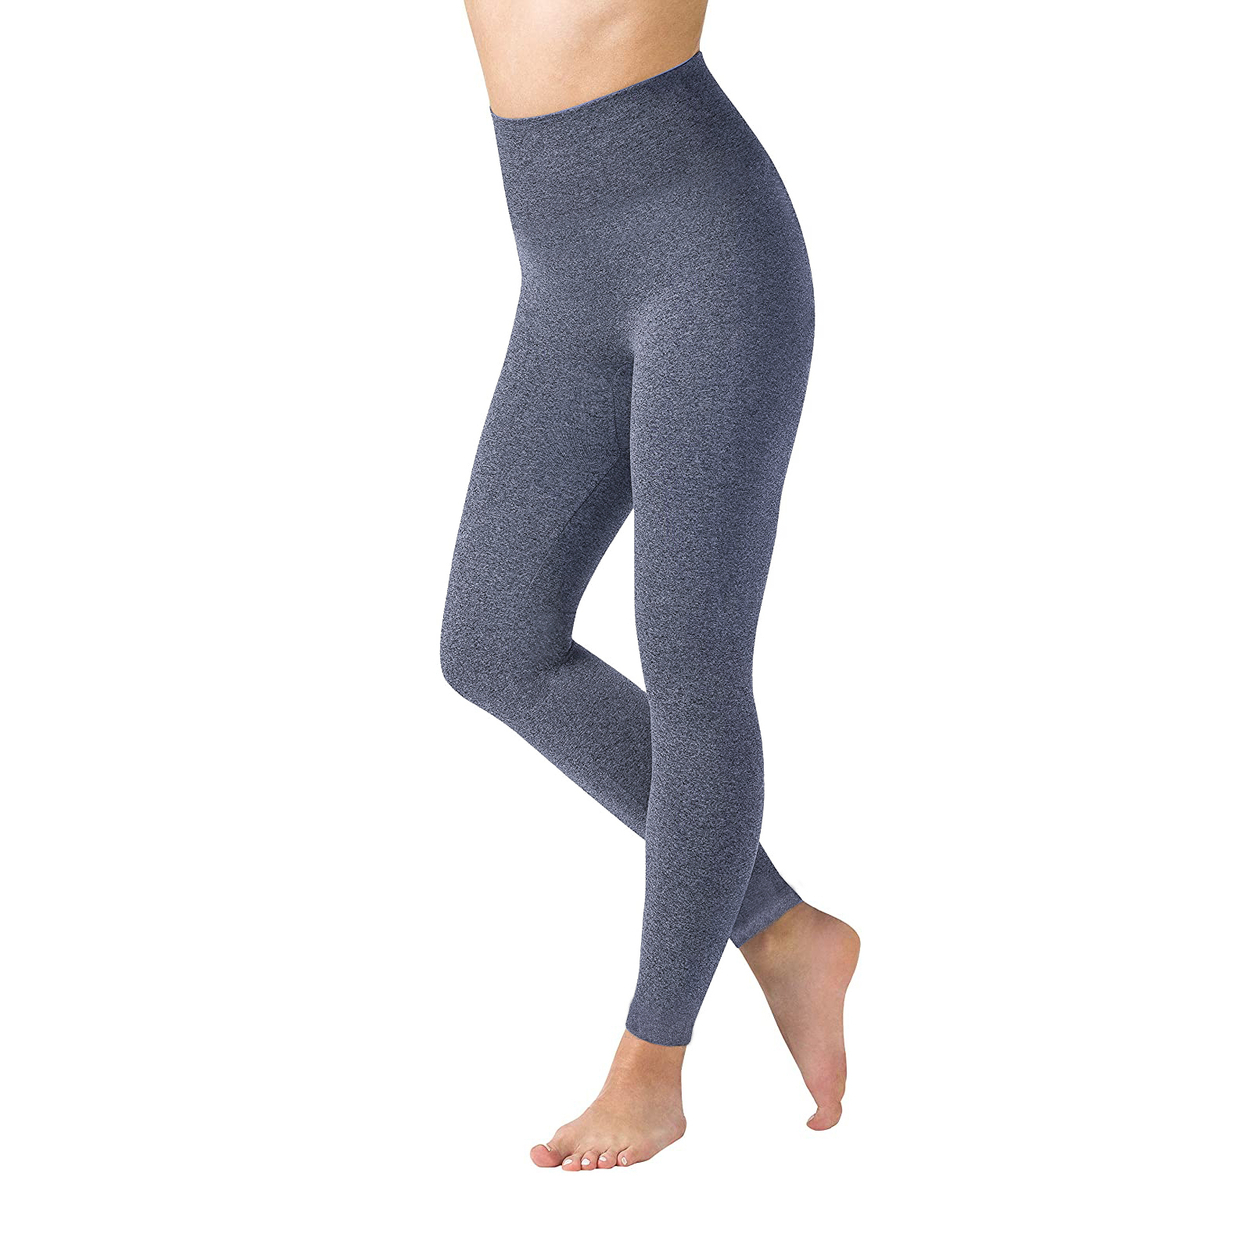 Multi-Pack: Women's High Waisted Ultra-Soft Fleece Lined Warm Marled Leggings(Available In Plus Sizes) - 1-pack, Charcoal, Medium